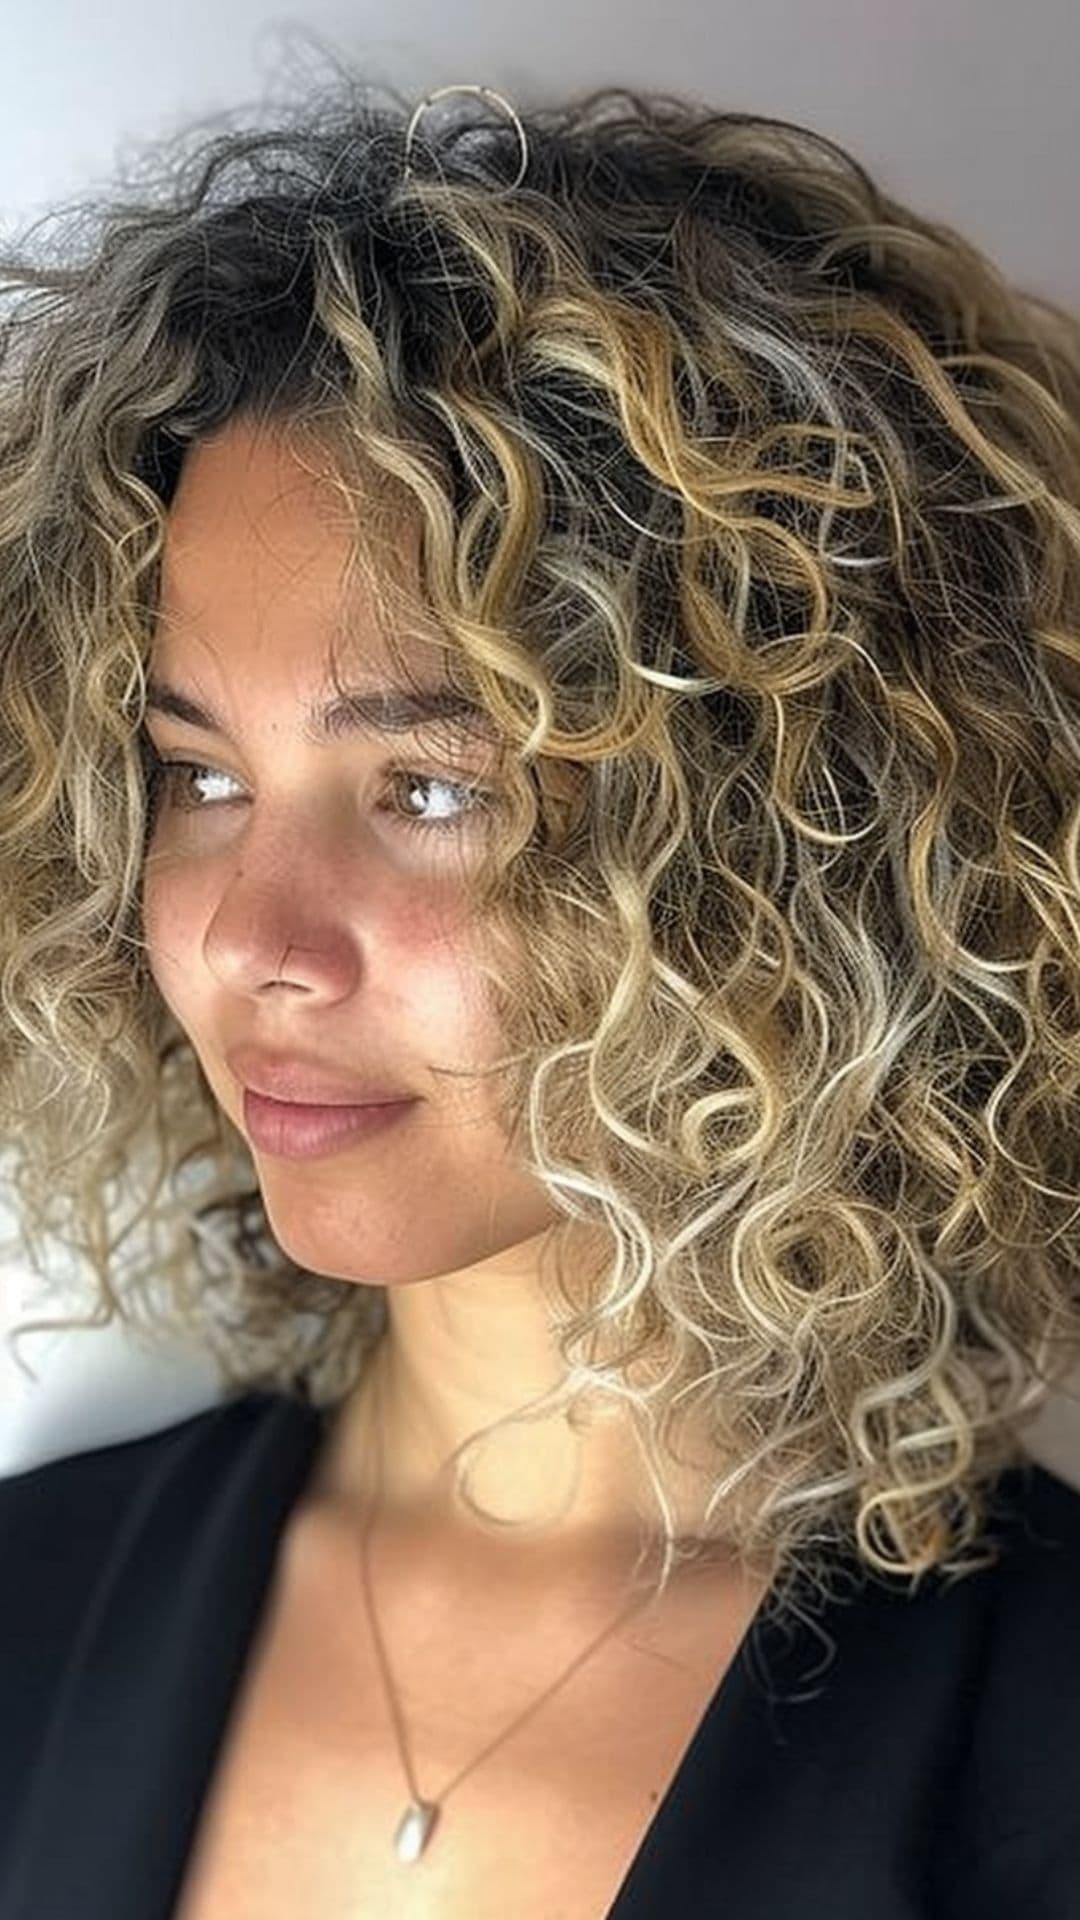 A woman modelling a blonde ombre curly hair.